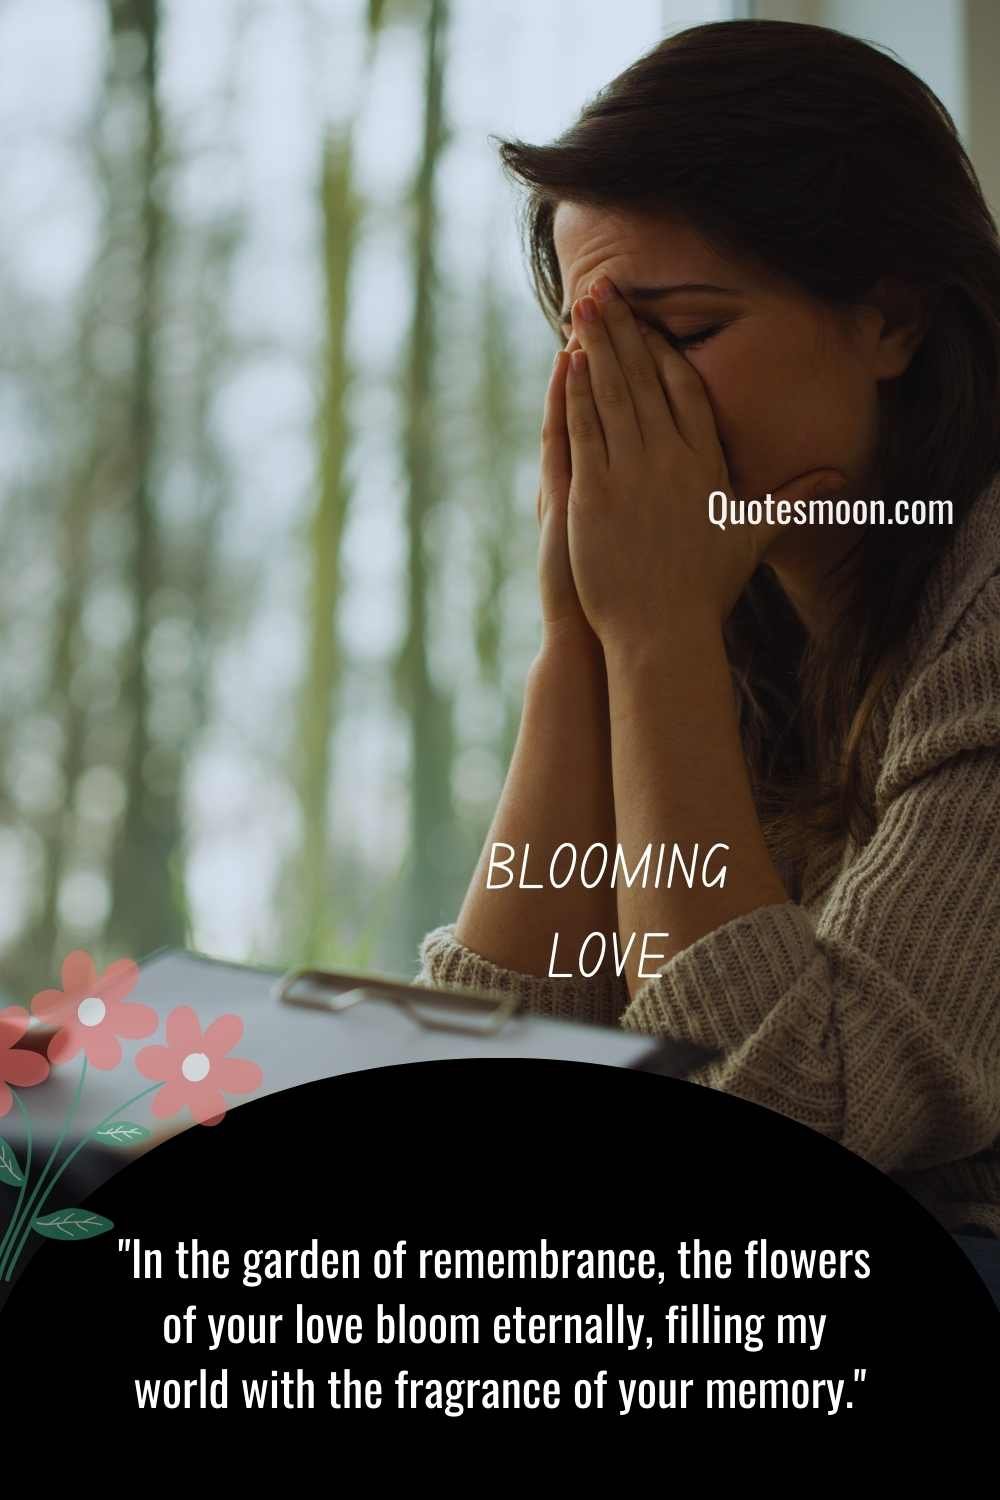 Missing my husband who died Quotes with images